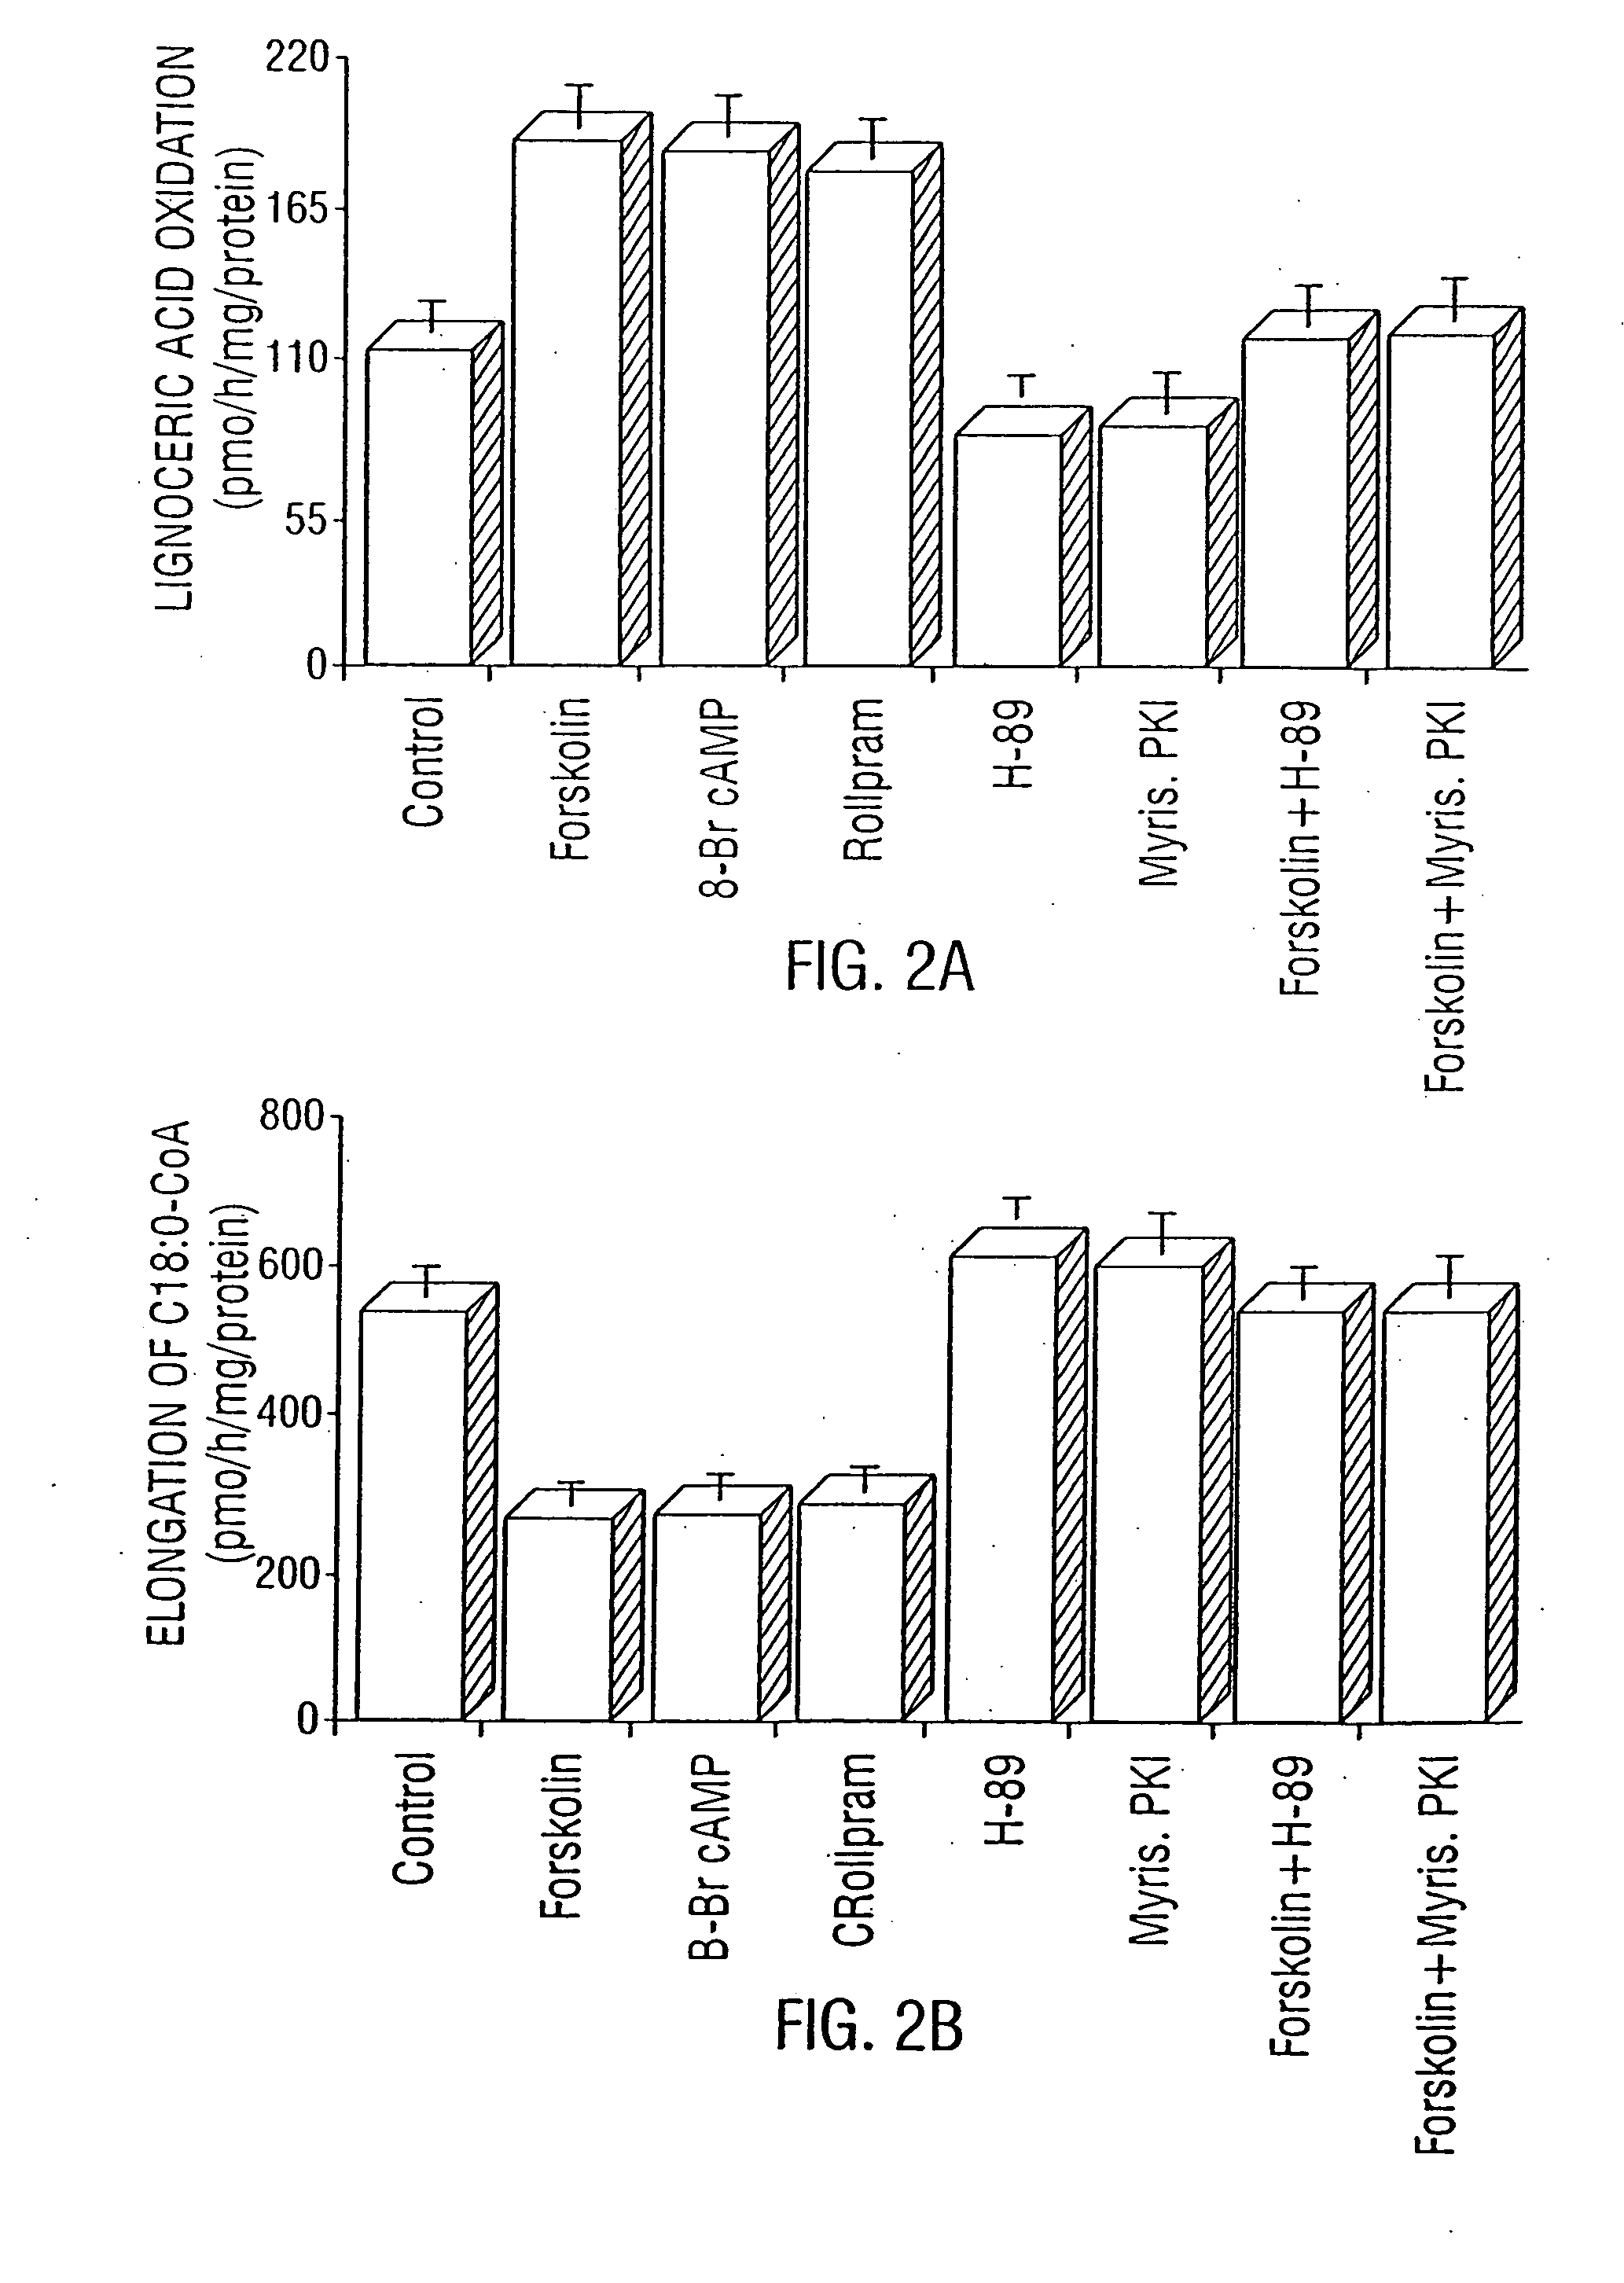 Inhibitors of nitric oxide synthase